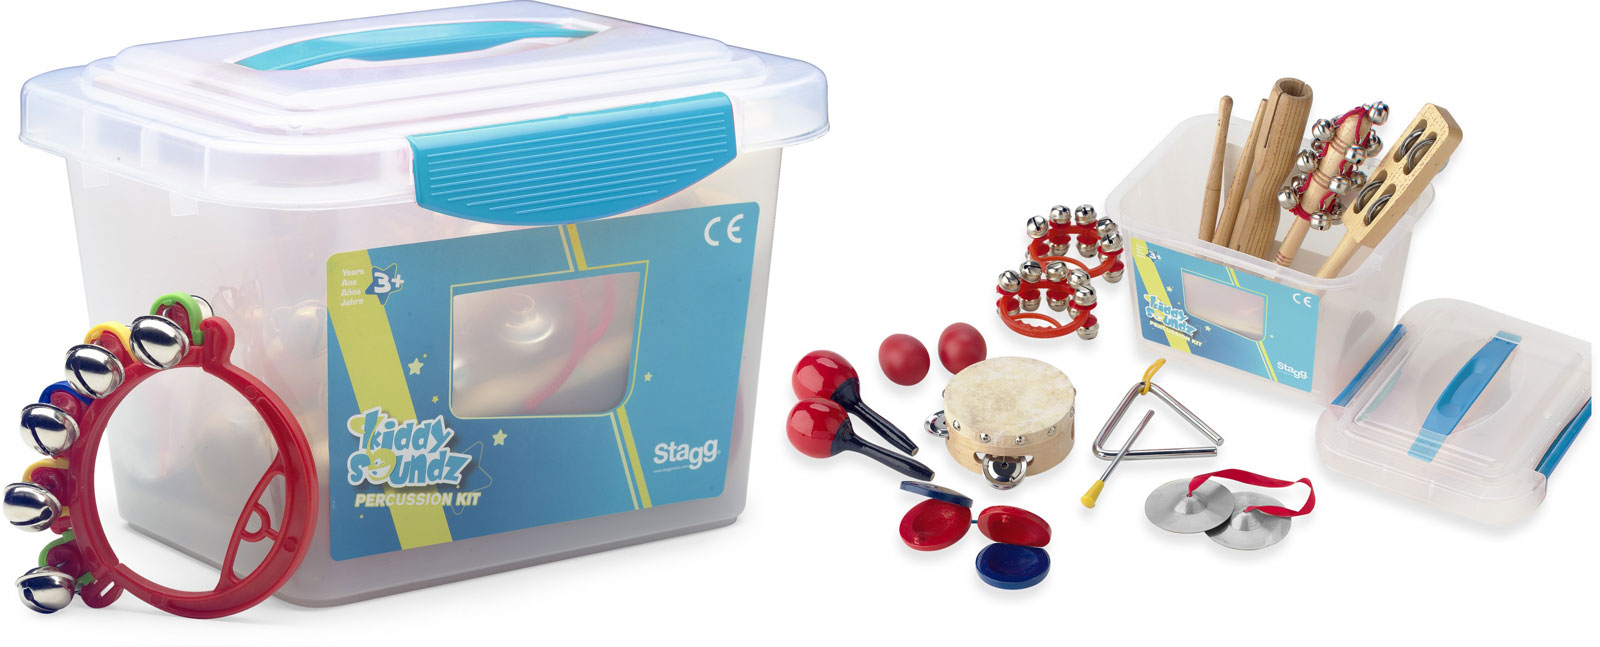 STAGG CHILDREN'S PERCUSSION KIT